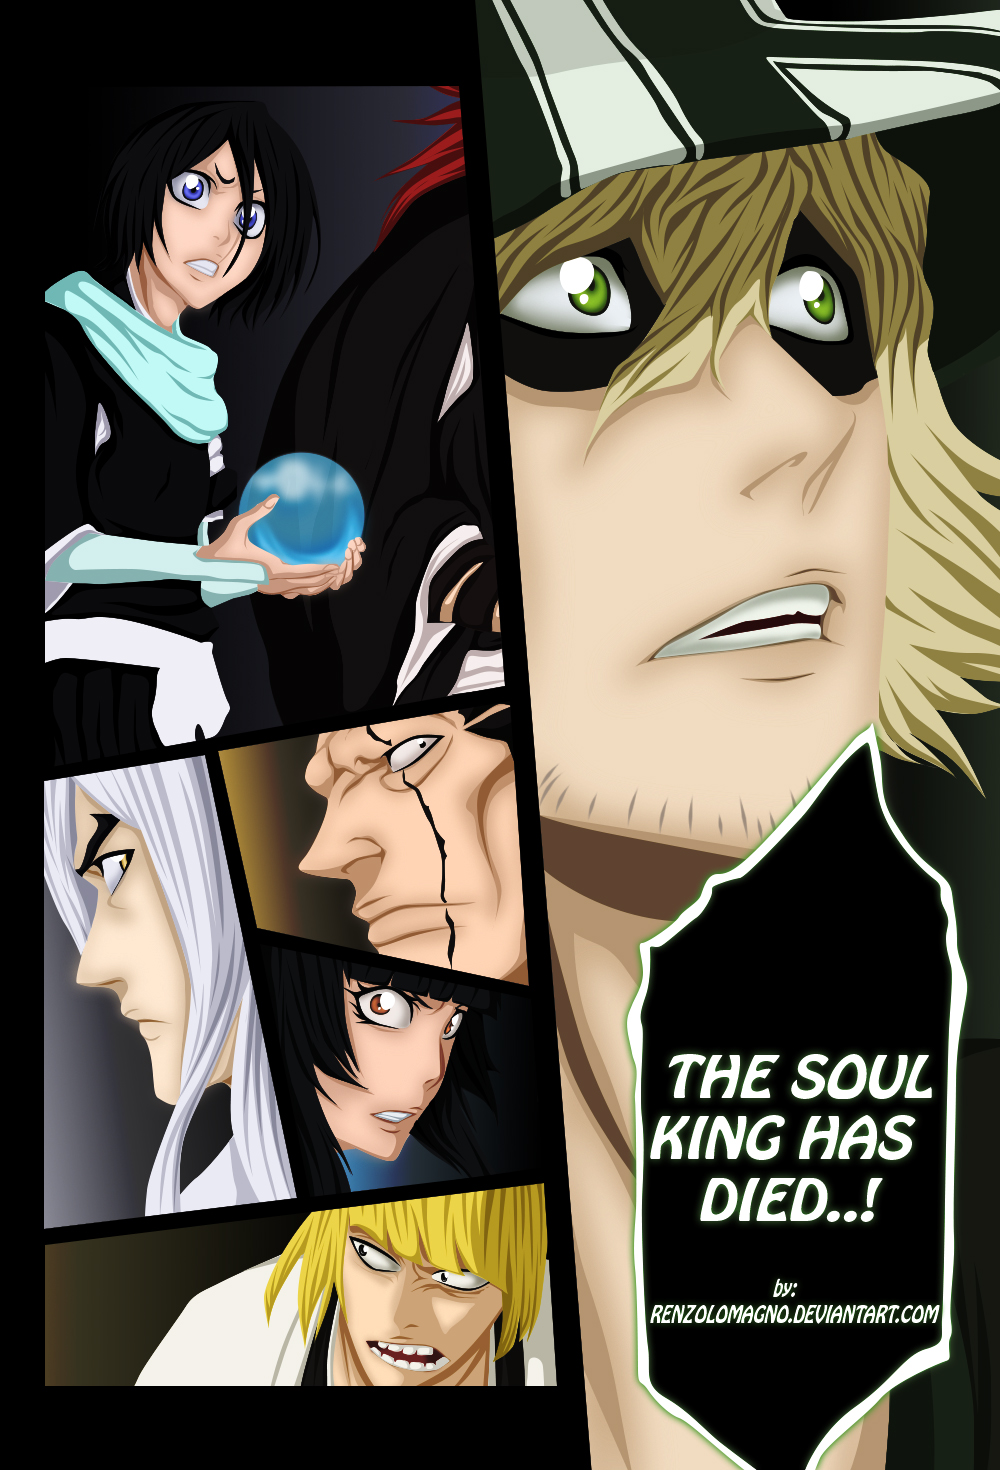 Bleach 615 Soul King Died By Renzolomagno Daily Anime Art